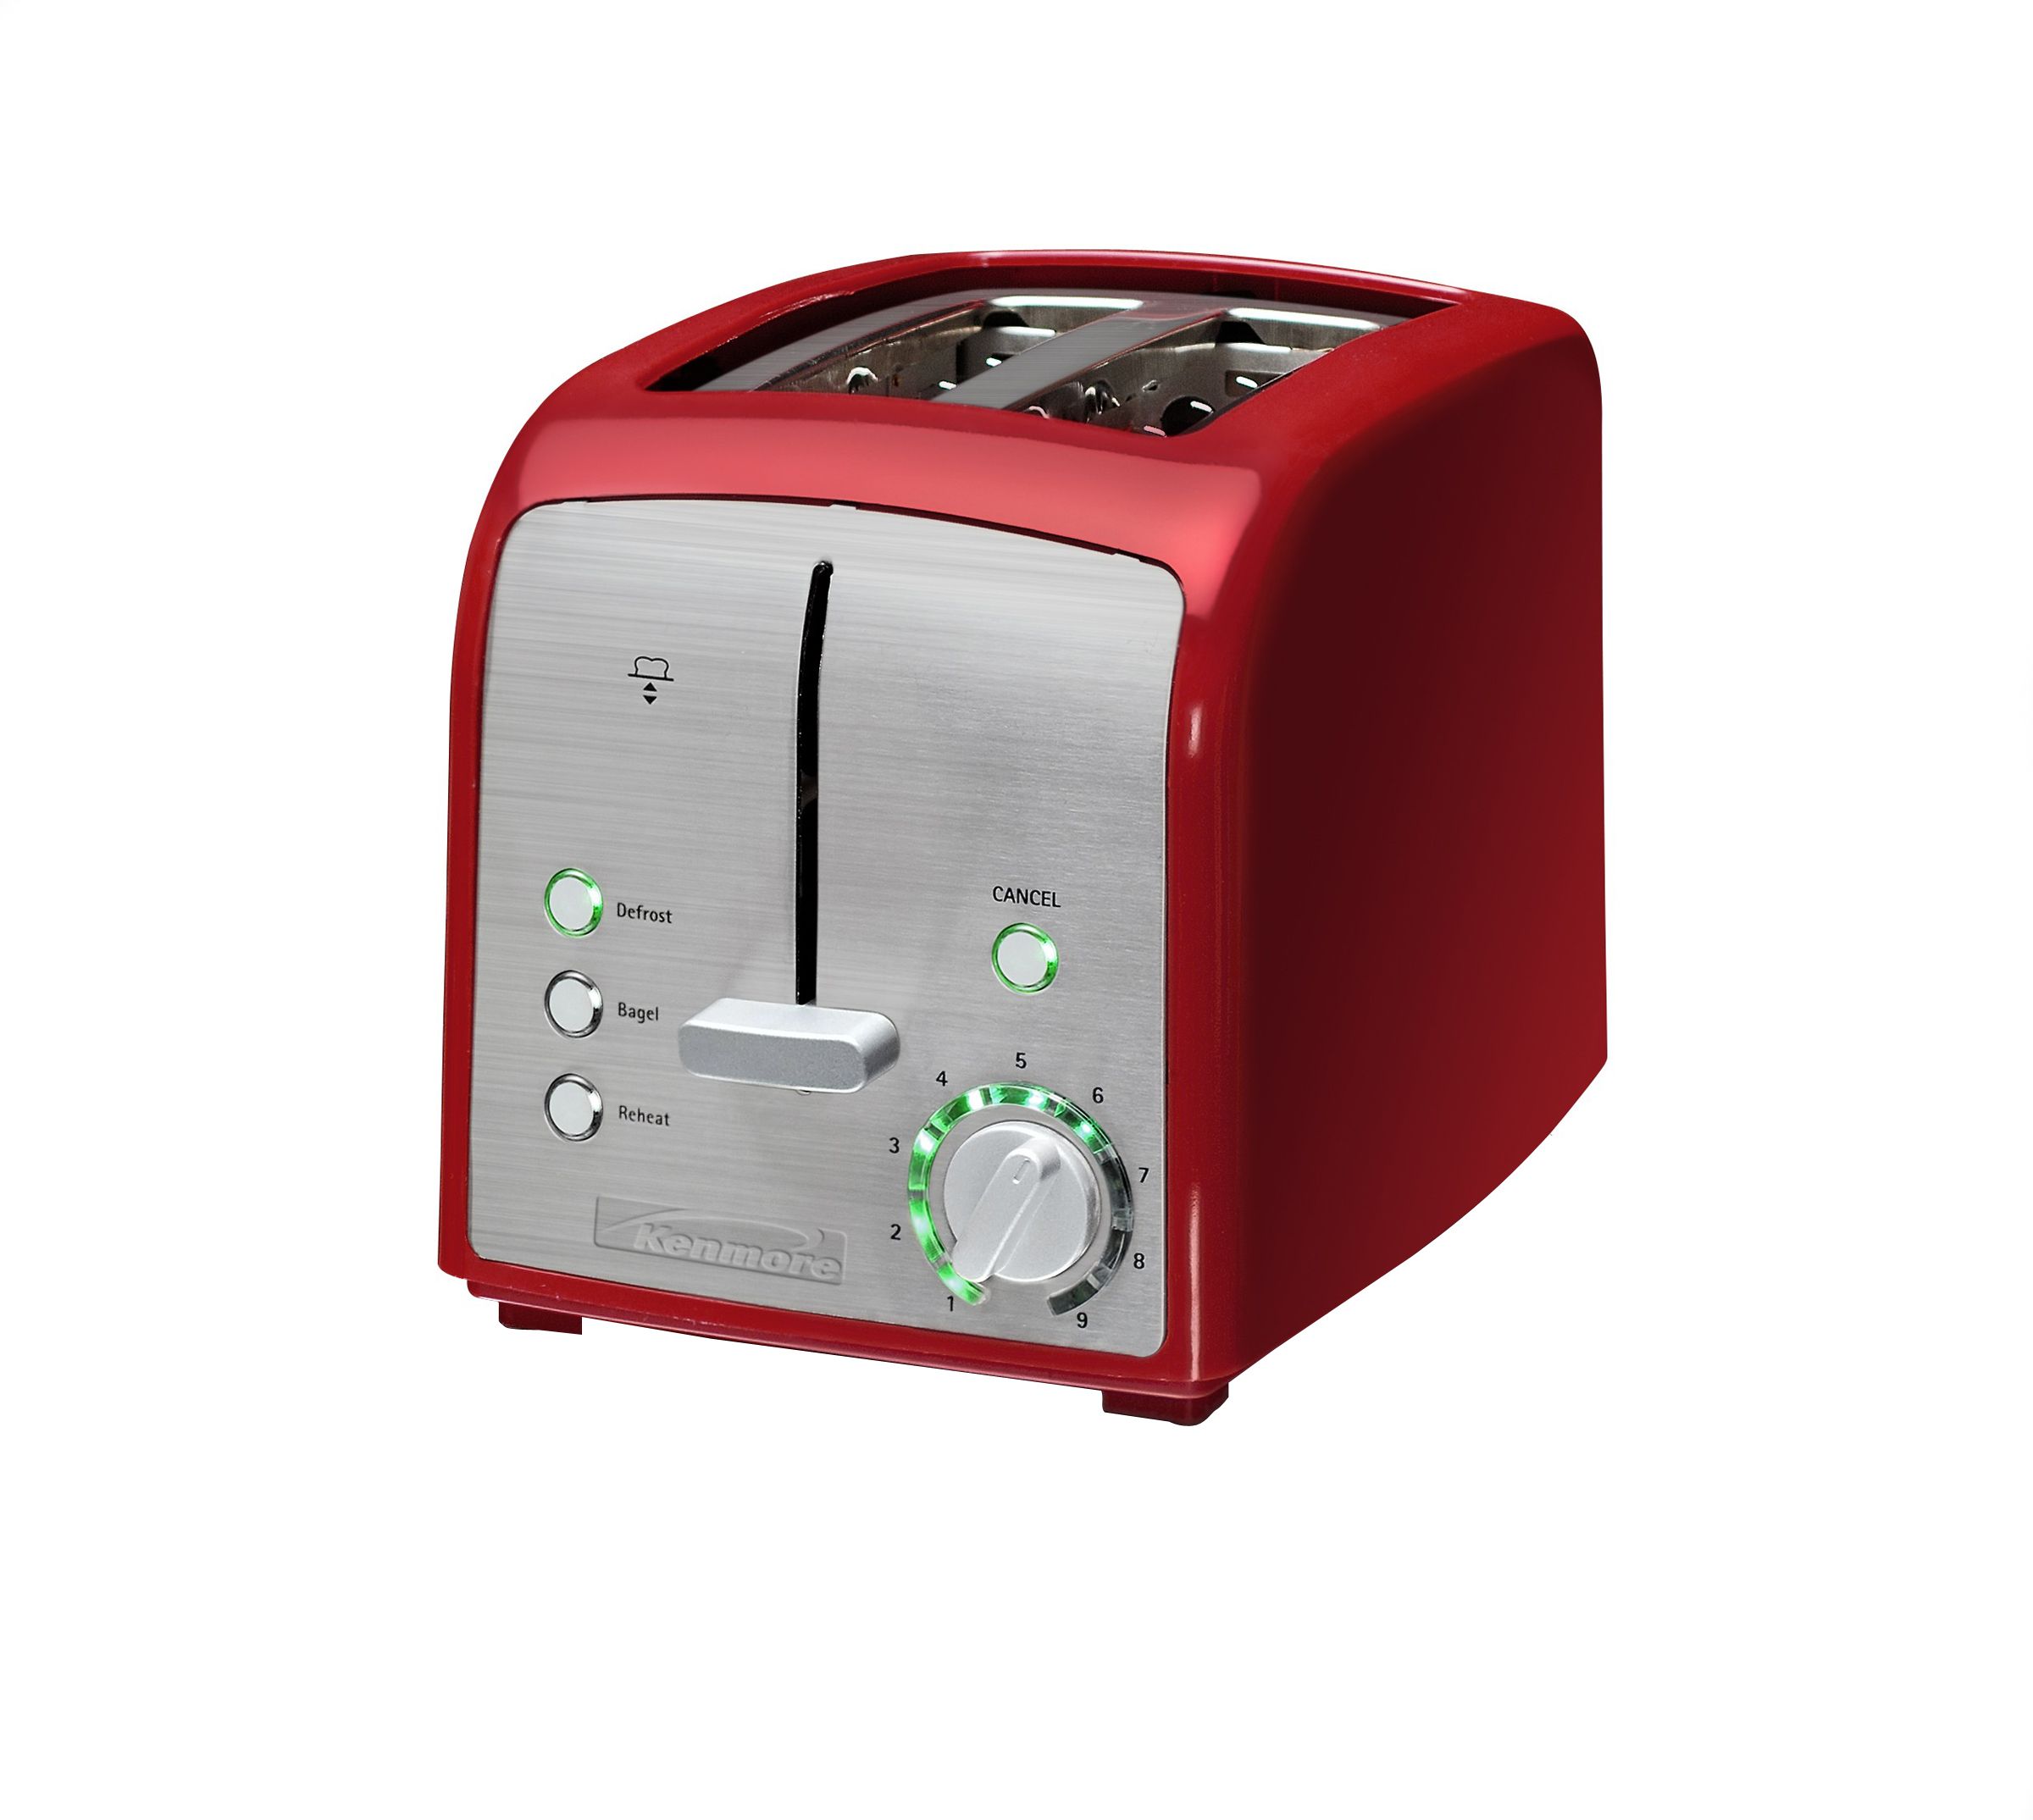 kenmore-135201rd-2-slice-toaster-red